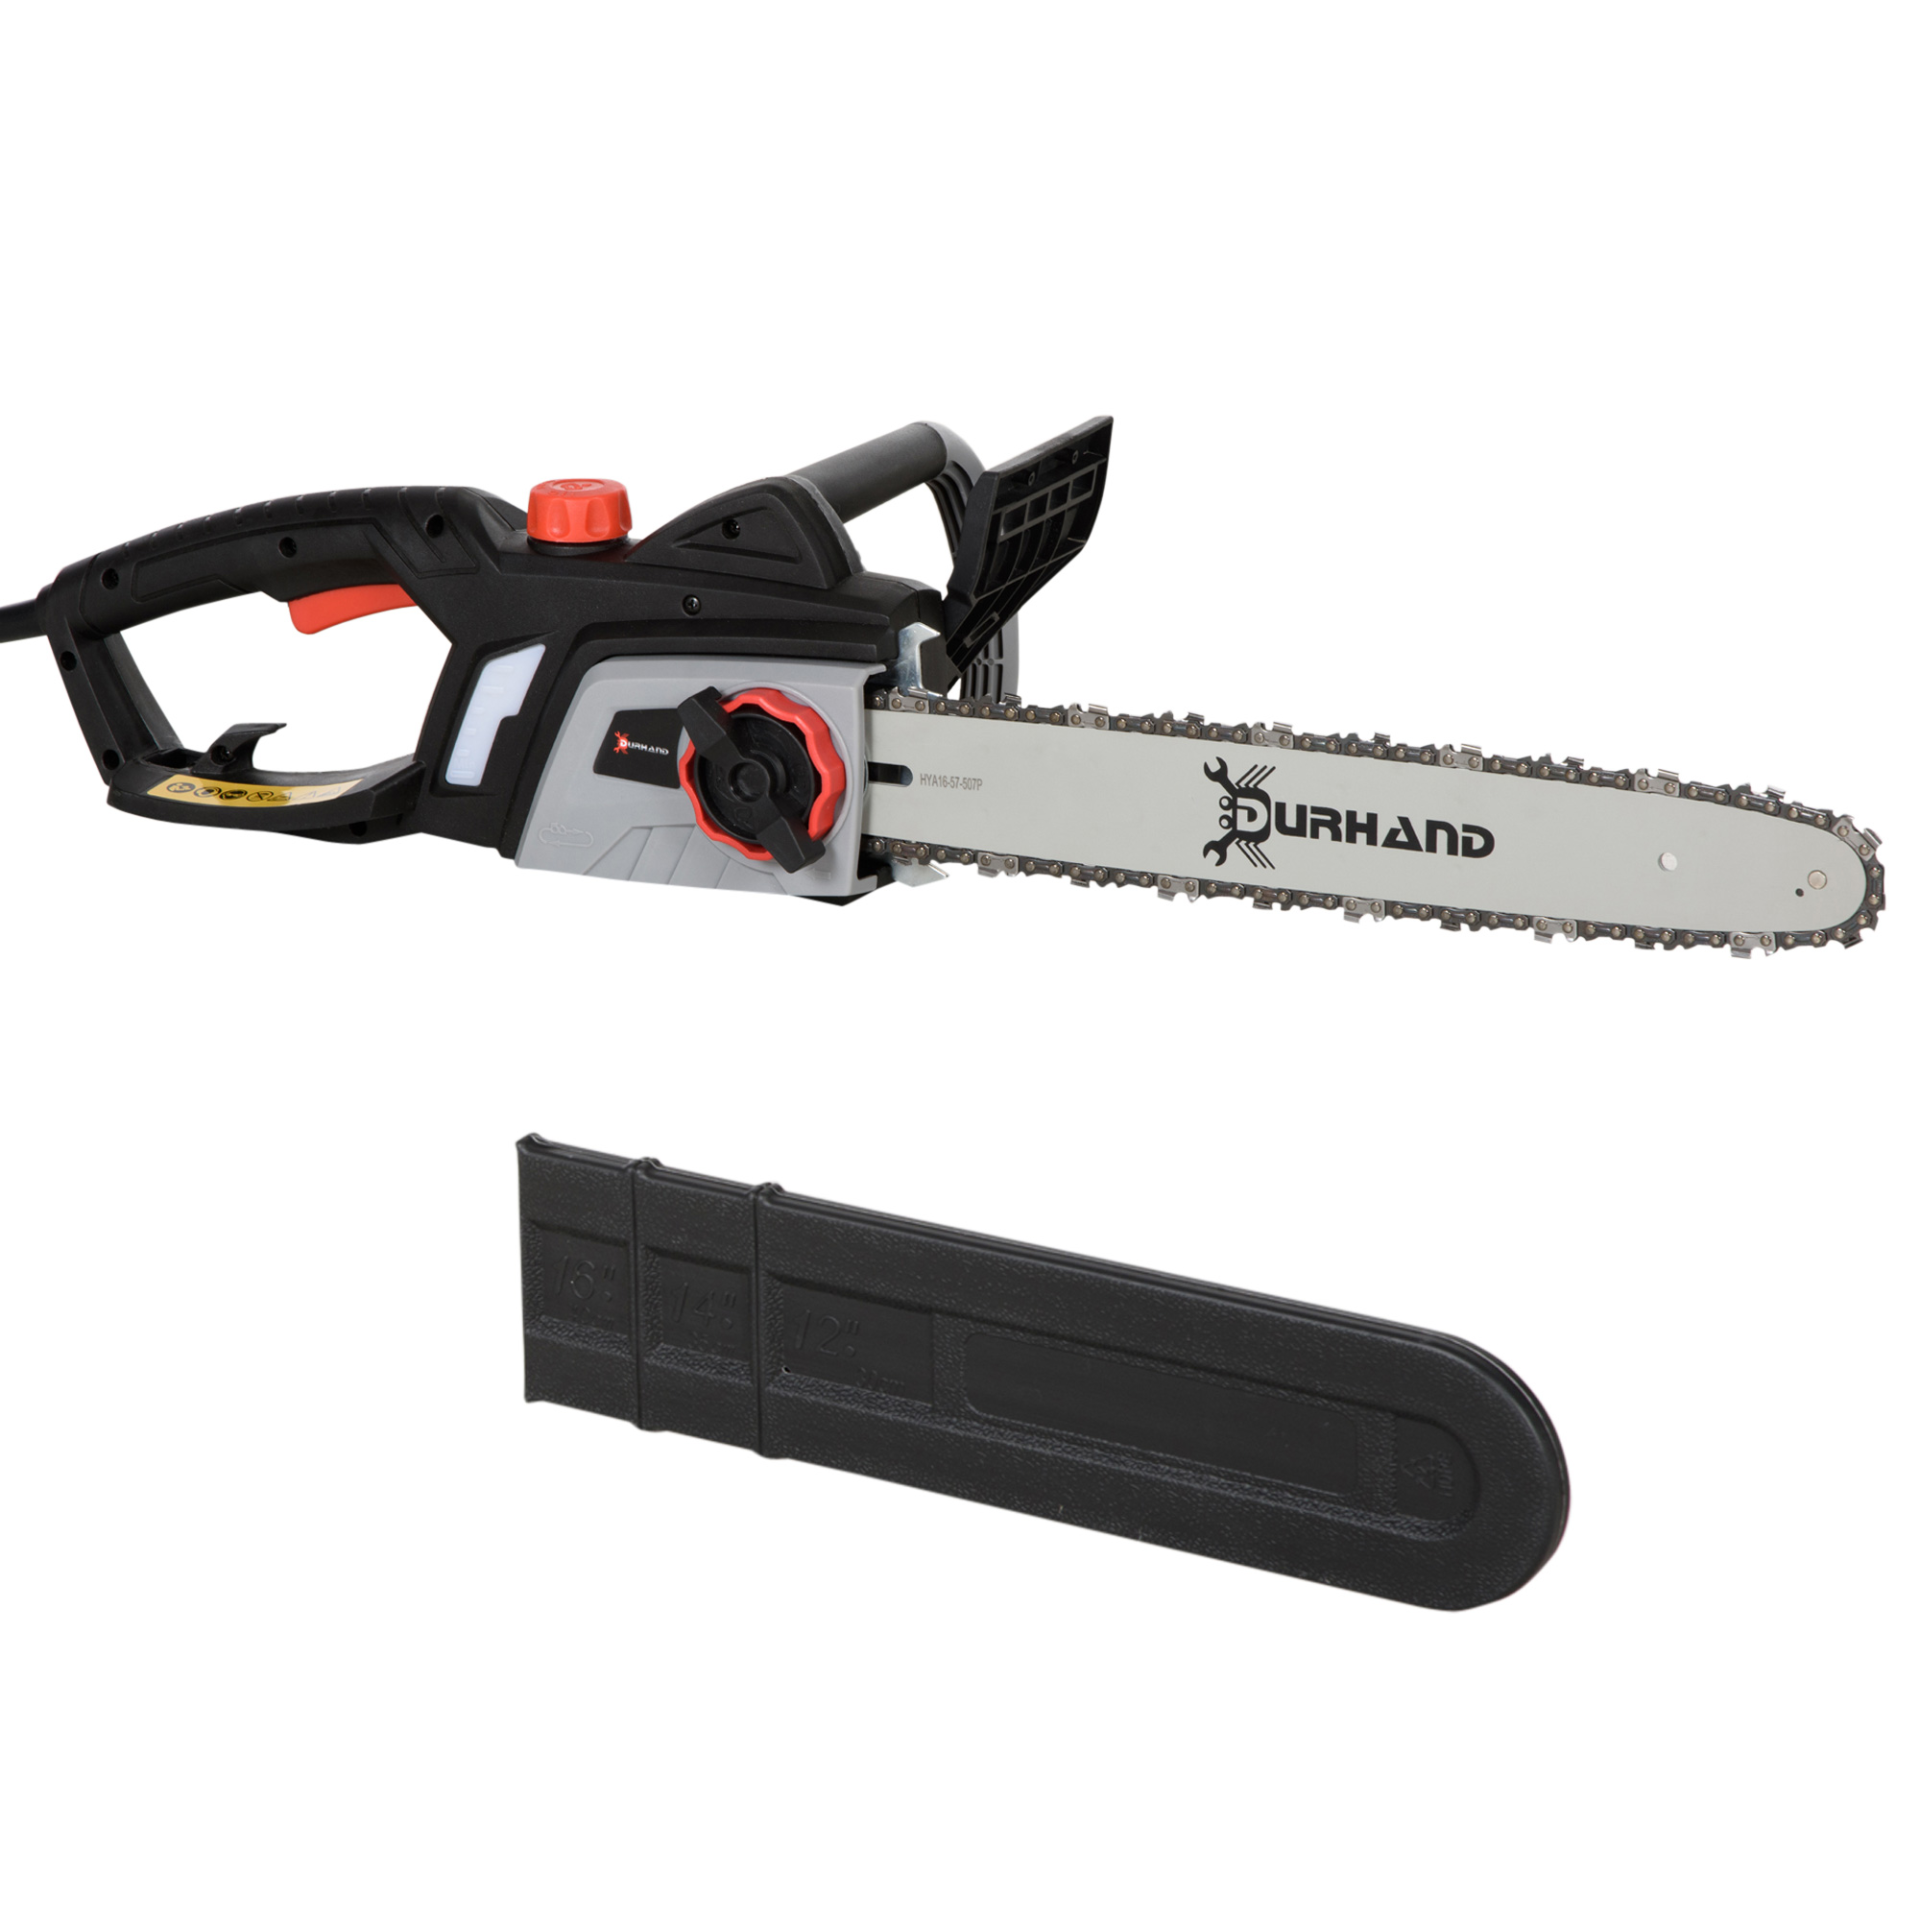 DURHAND 1600W Electric Chainsaw with Double Brake Tool-Free Chain Tensioning an